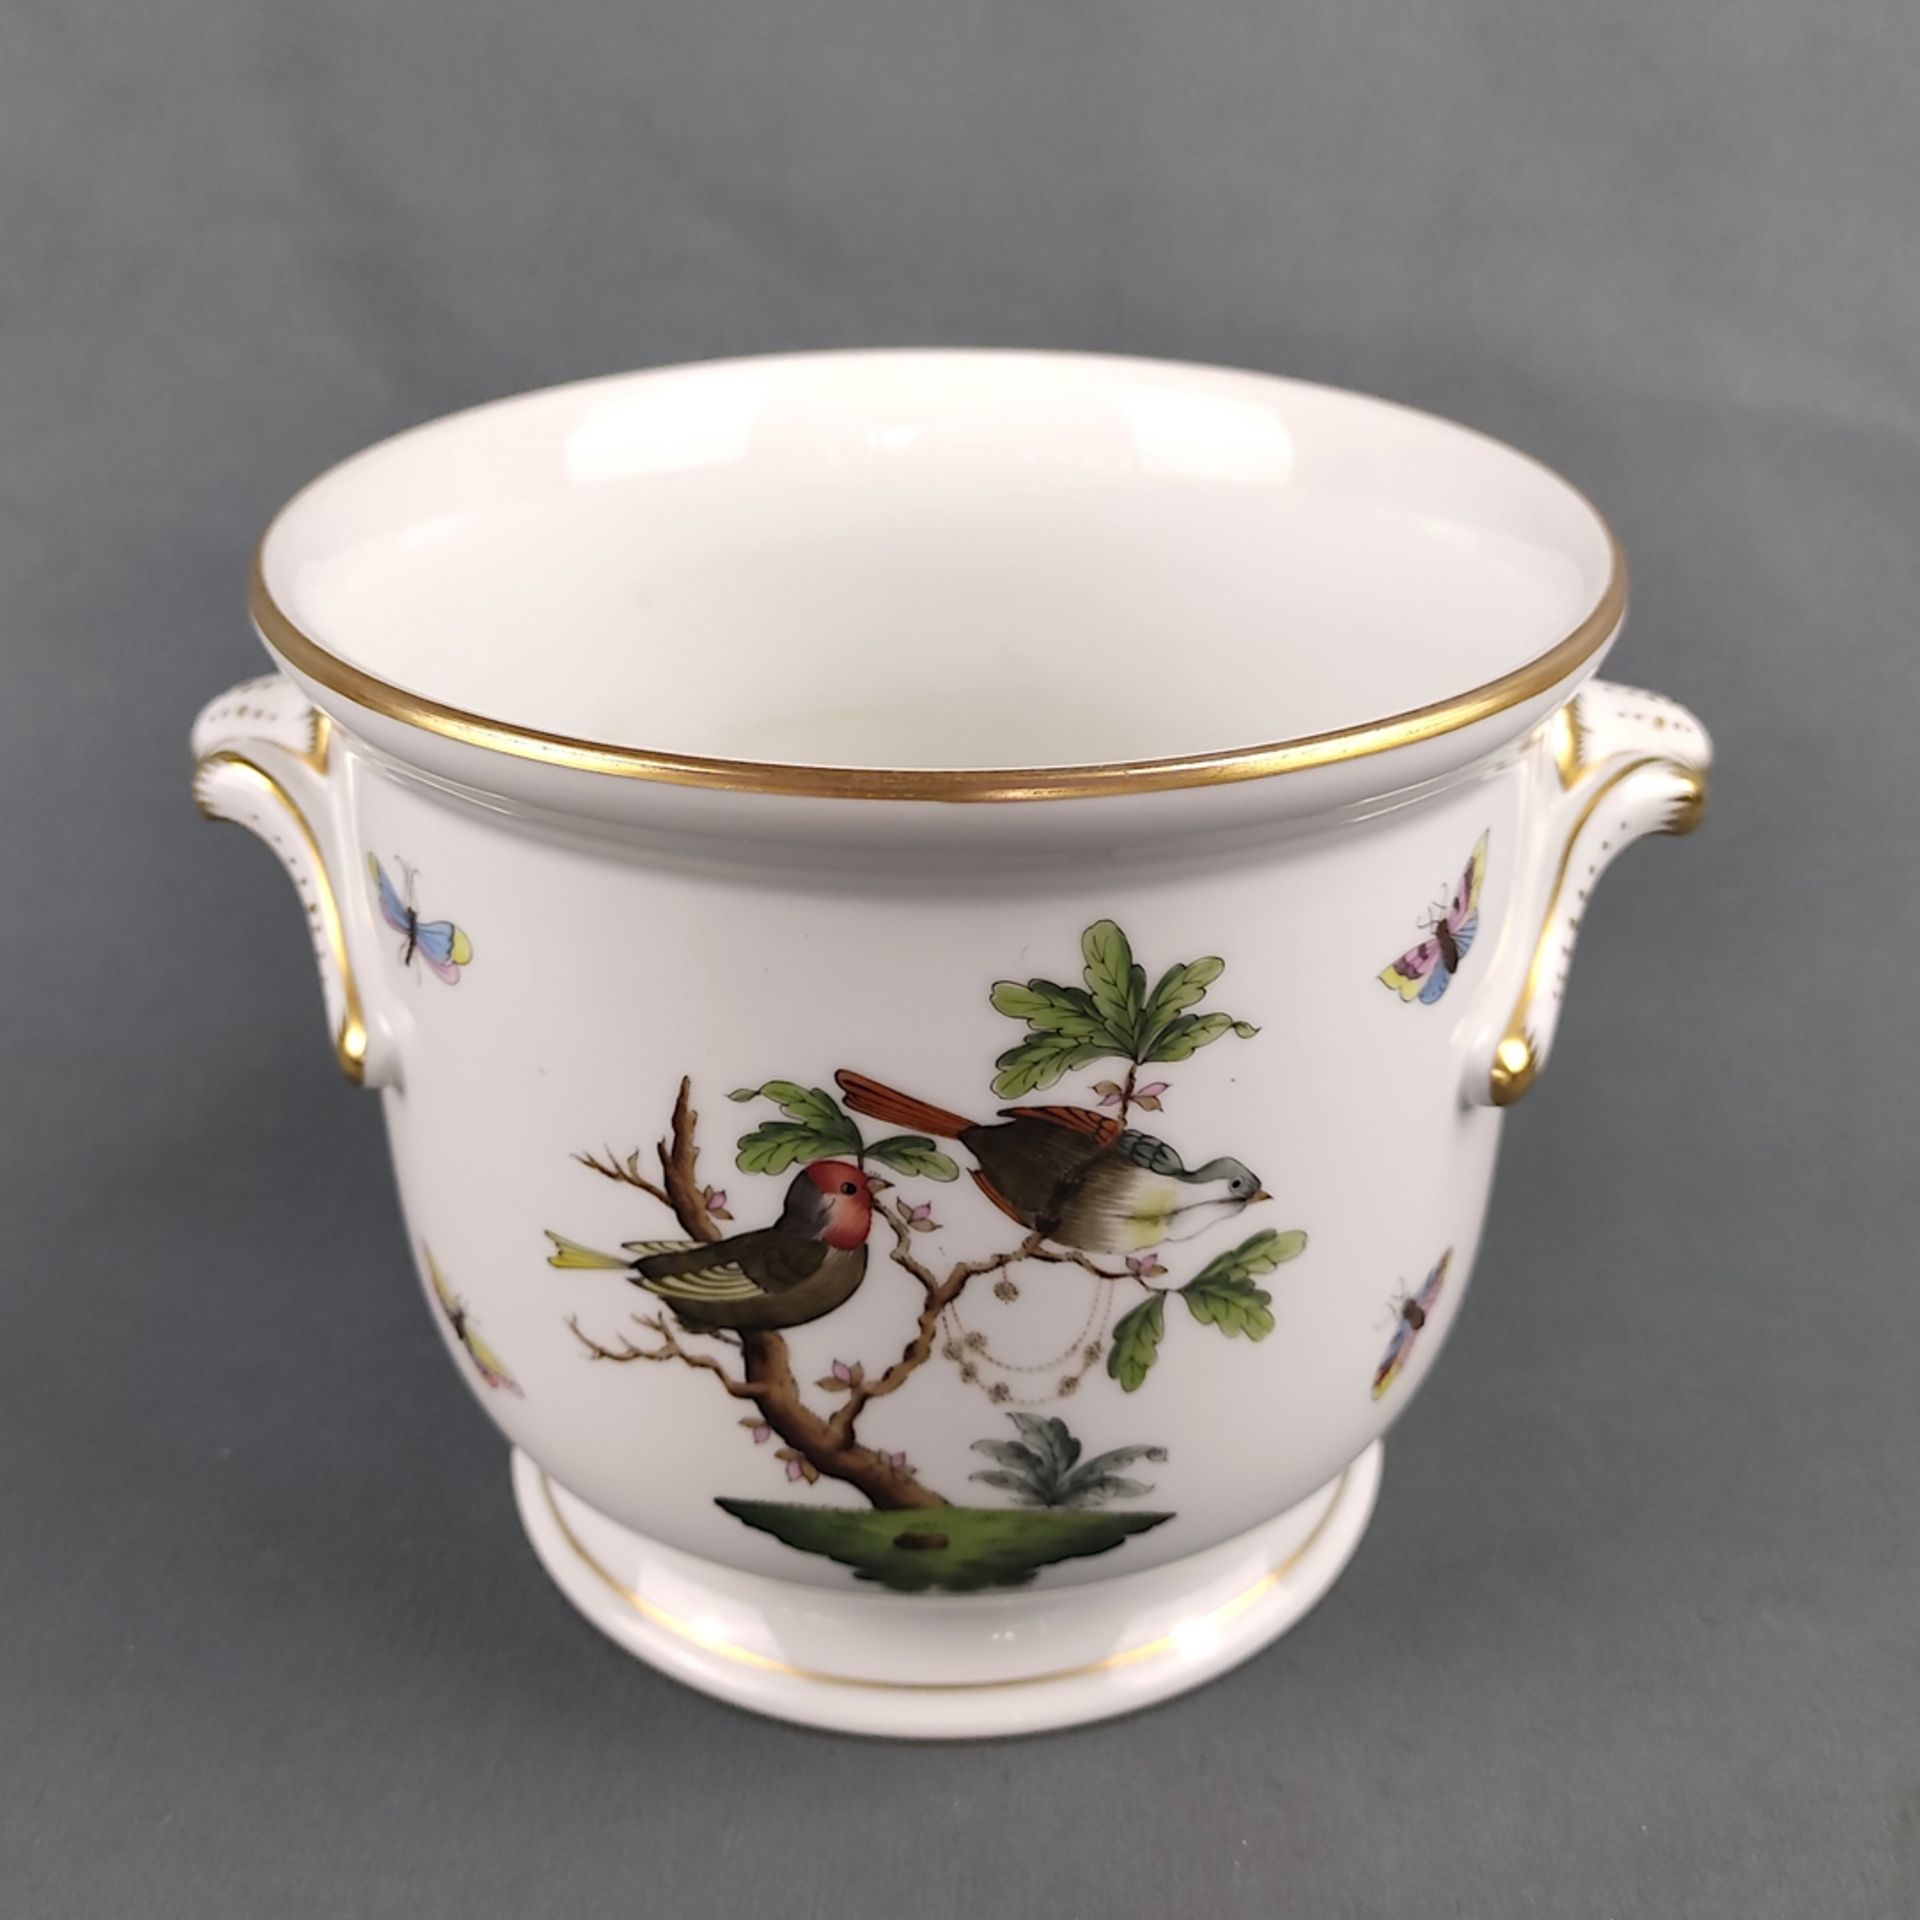 Cachepot Herend Hungary, decor Rothschild, golden decorated, with two small handles, height 14cm, m - Image 2 of 5